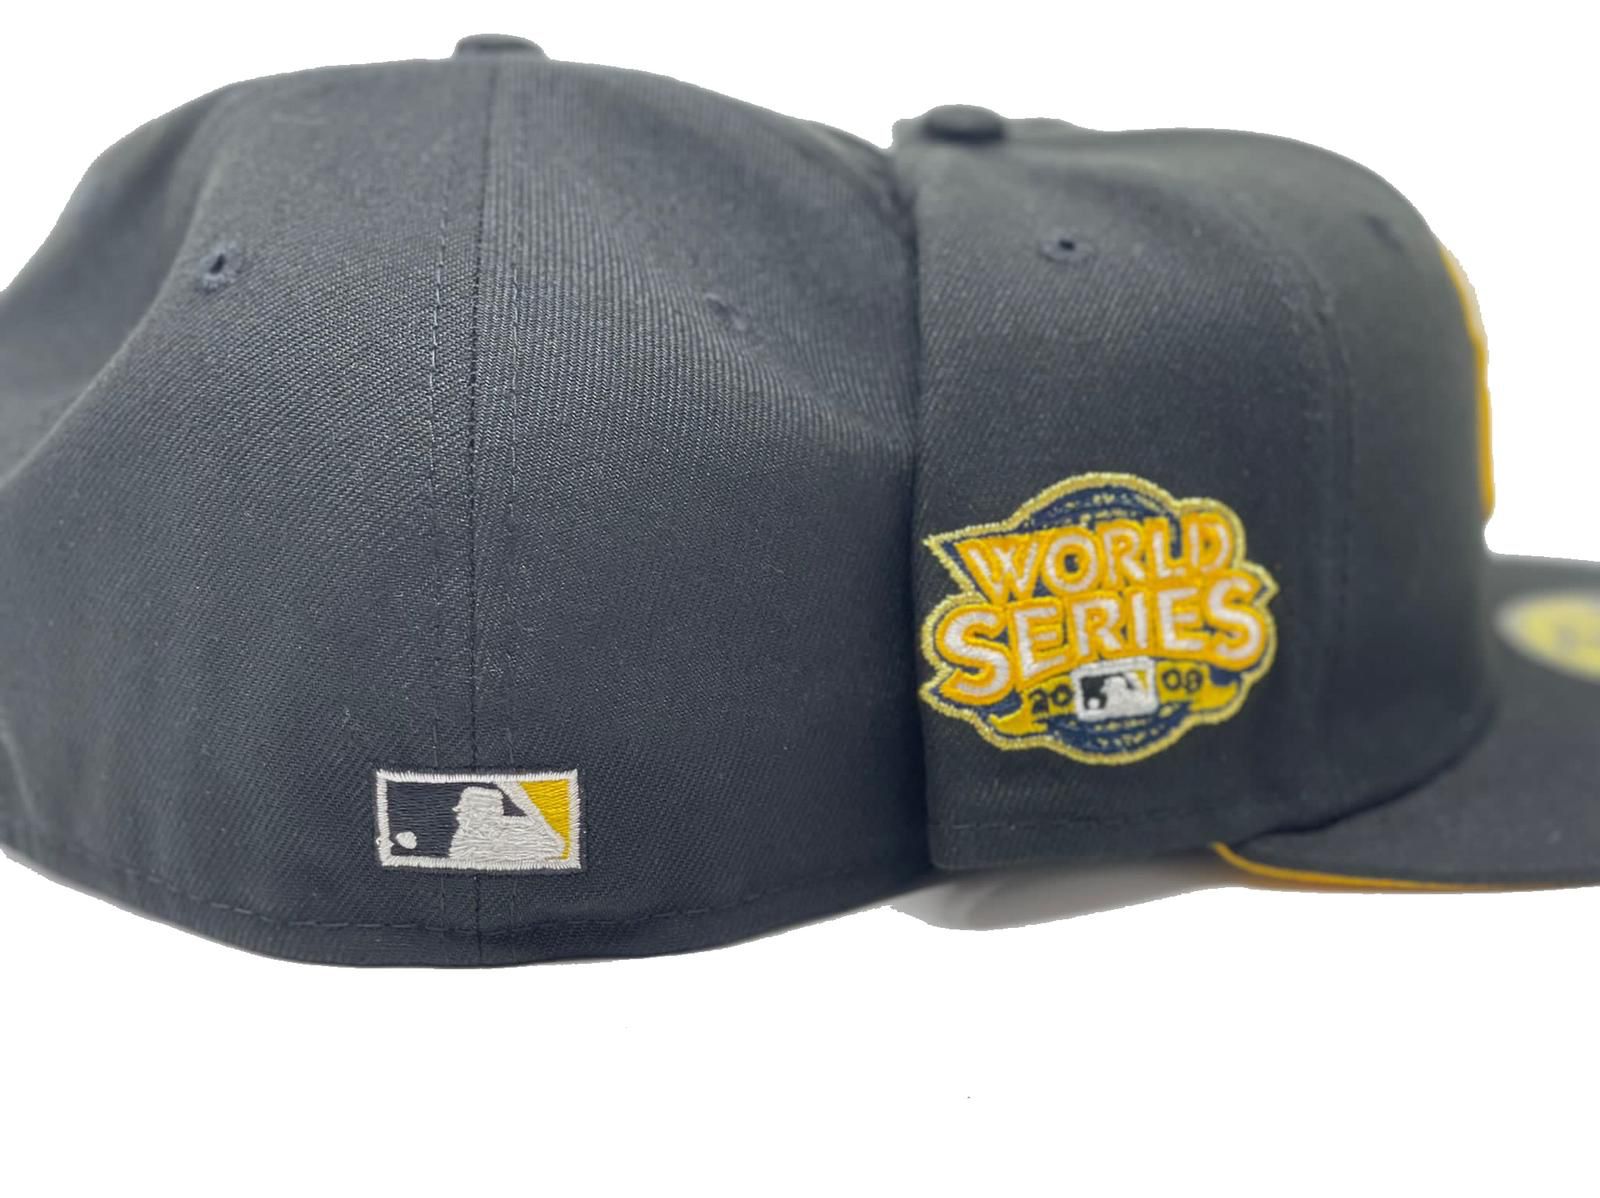 Black New York Yankees 2009 World Series 59fifty New Era Fitted Hat –  Sports World 165